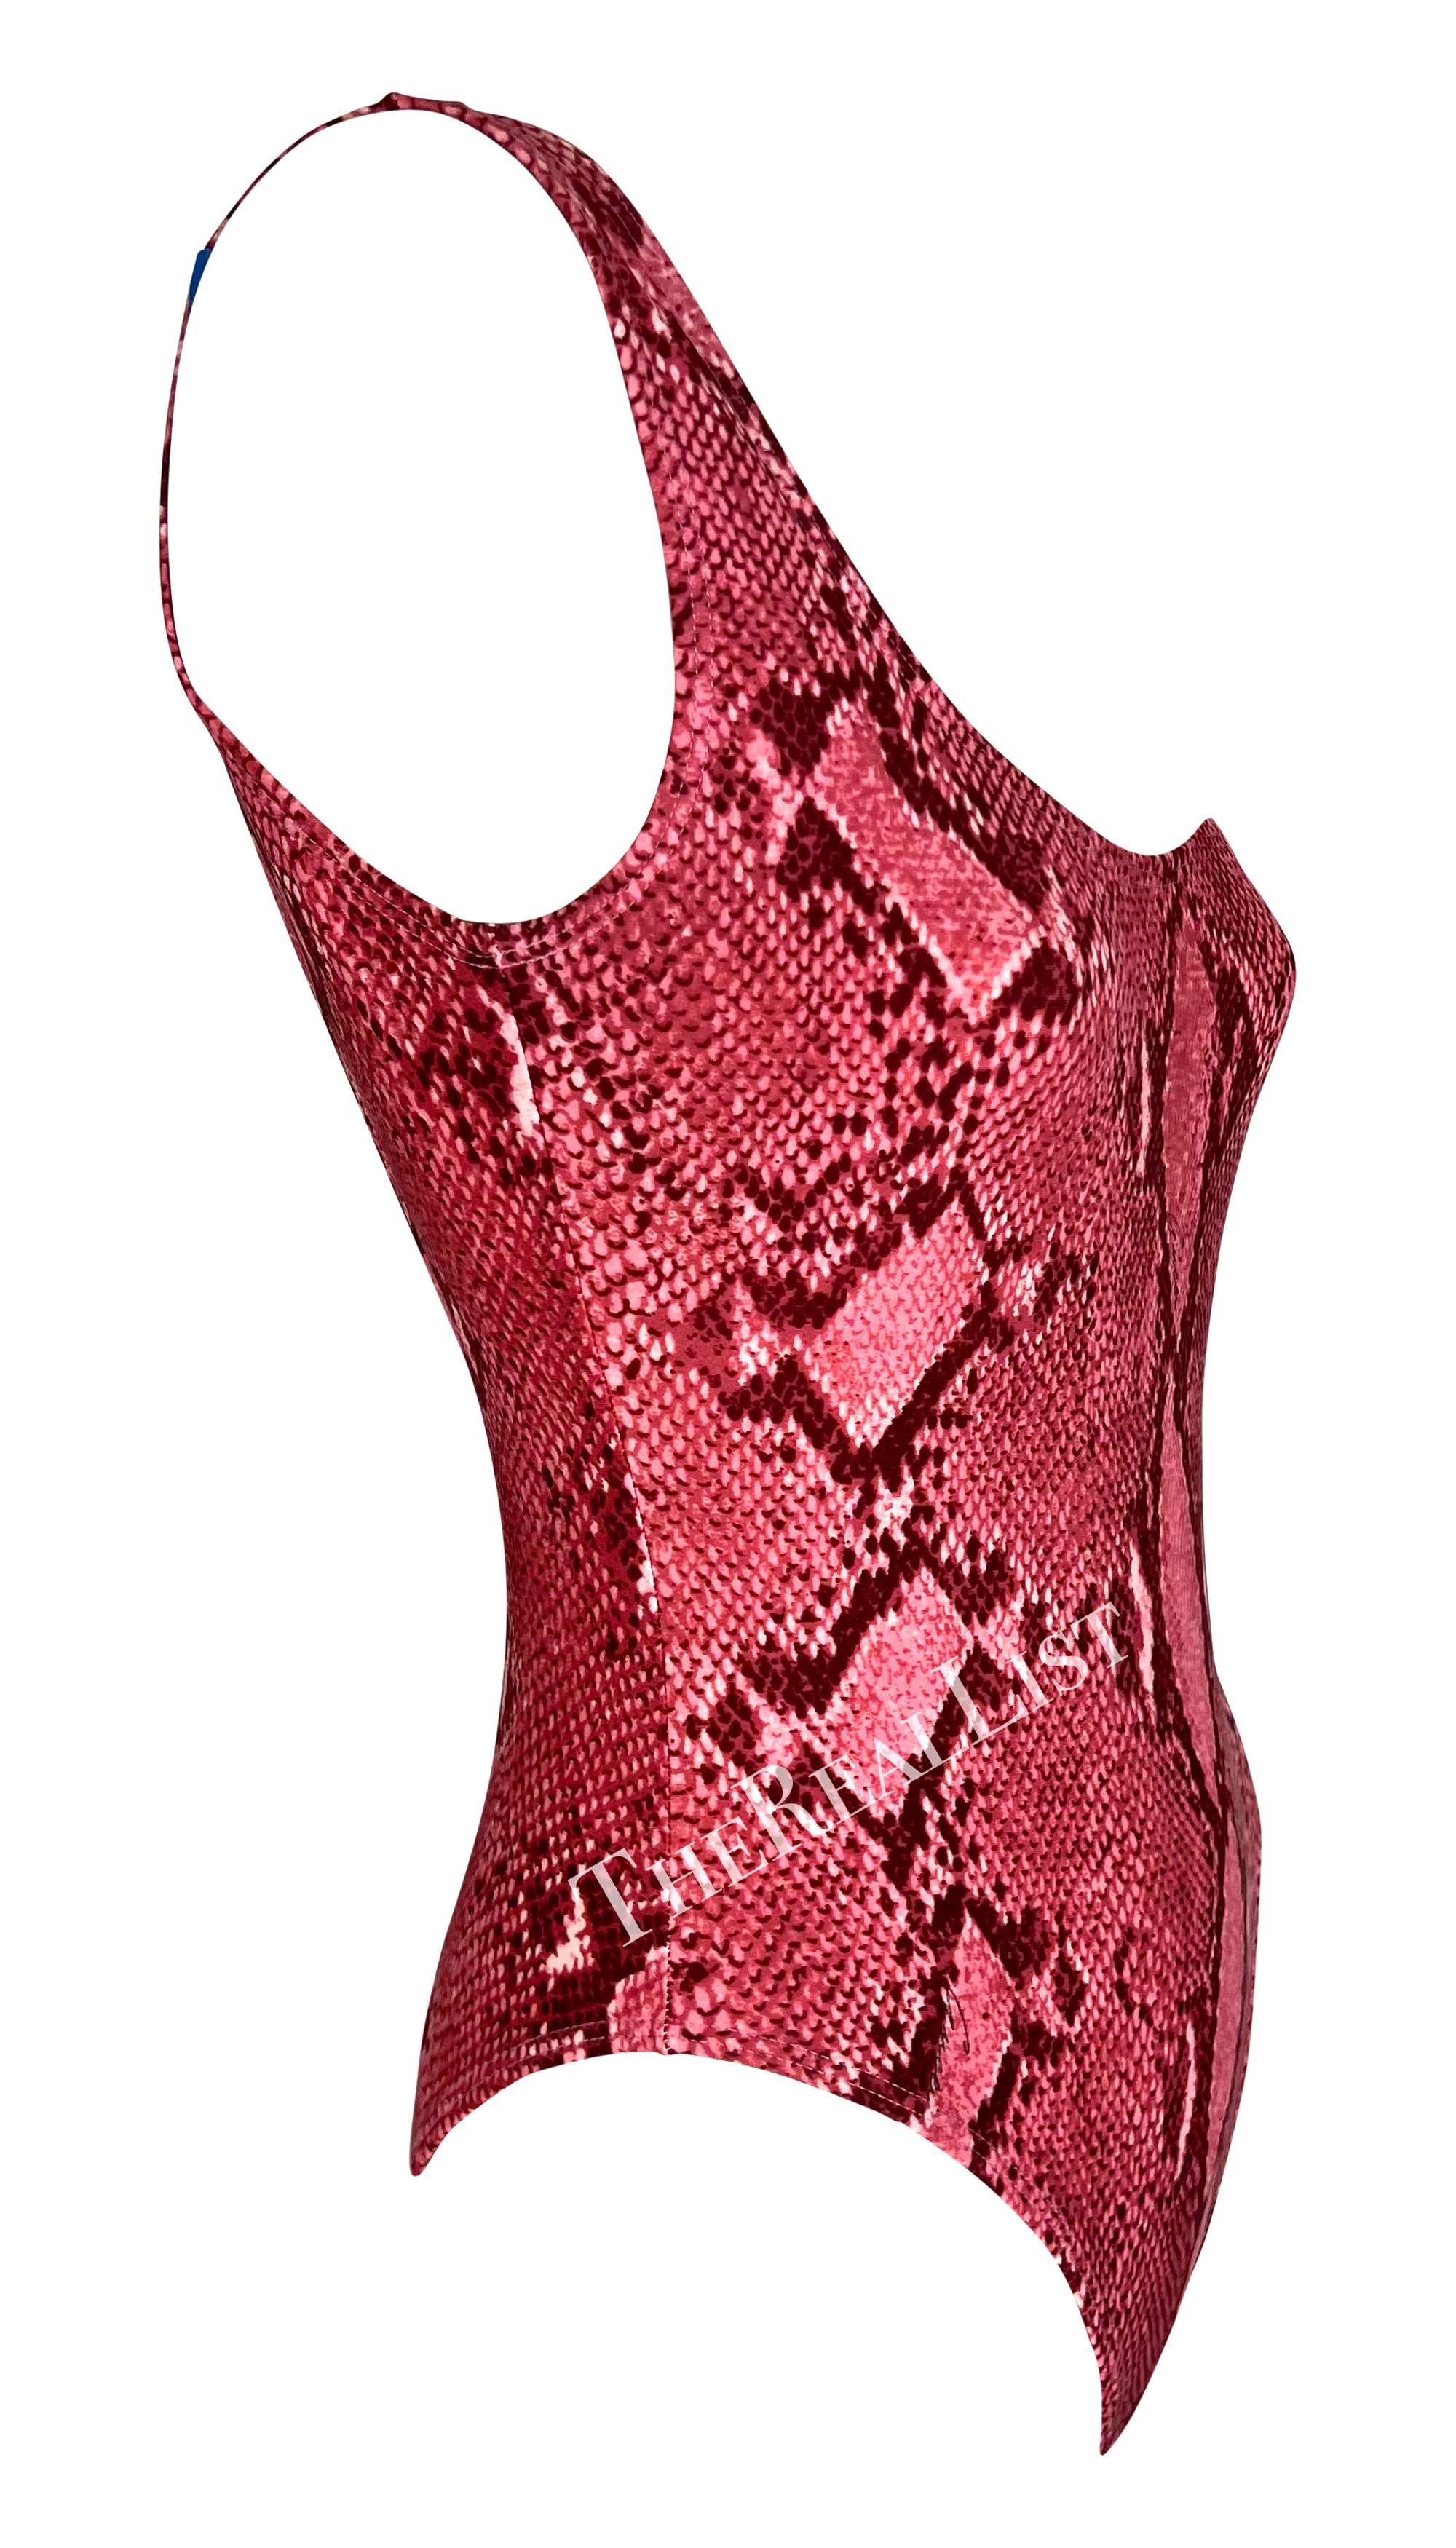 S/S 2000 Gucci by Tom Ford Pink Snakeskin Print One Piece Swimsuit Bodysuit For Sale 3